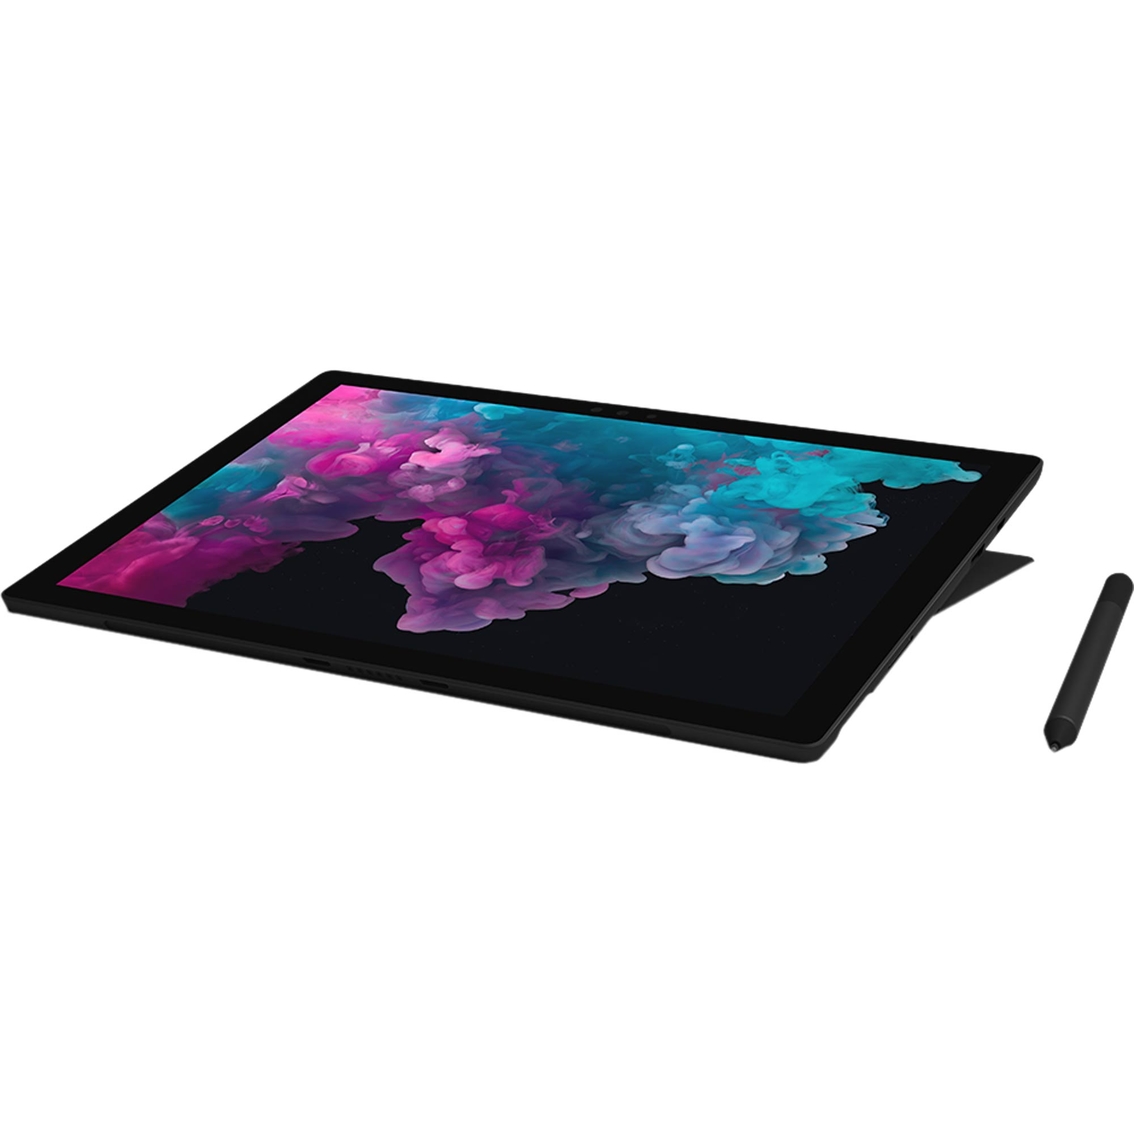 Microsoft Surface Pro 6 12.3 in. Touchscreen Intel i7 16GB RAM 512GB SSD Tablet - Image 5 of 7